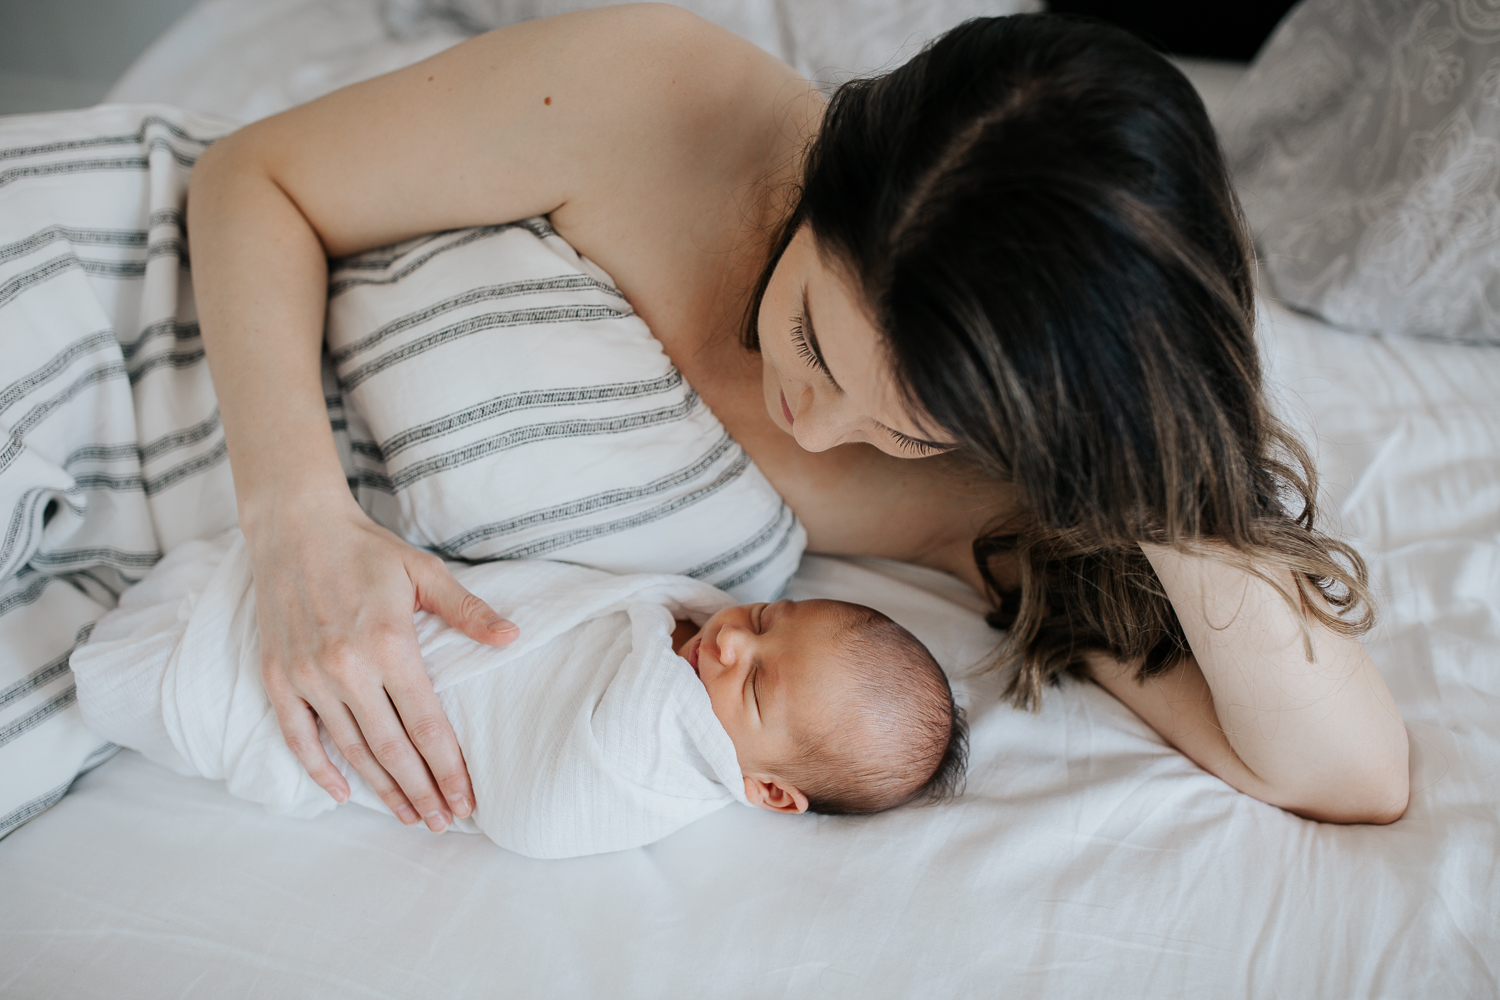 new mother with long dark hair lying on bed next to sleeping 2 week old baby boy wrapped in white swaddle - Stouffville Lifestyle Photos